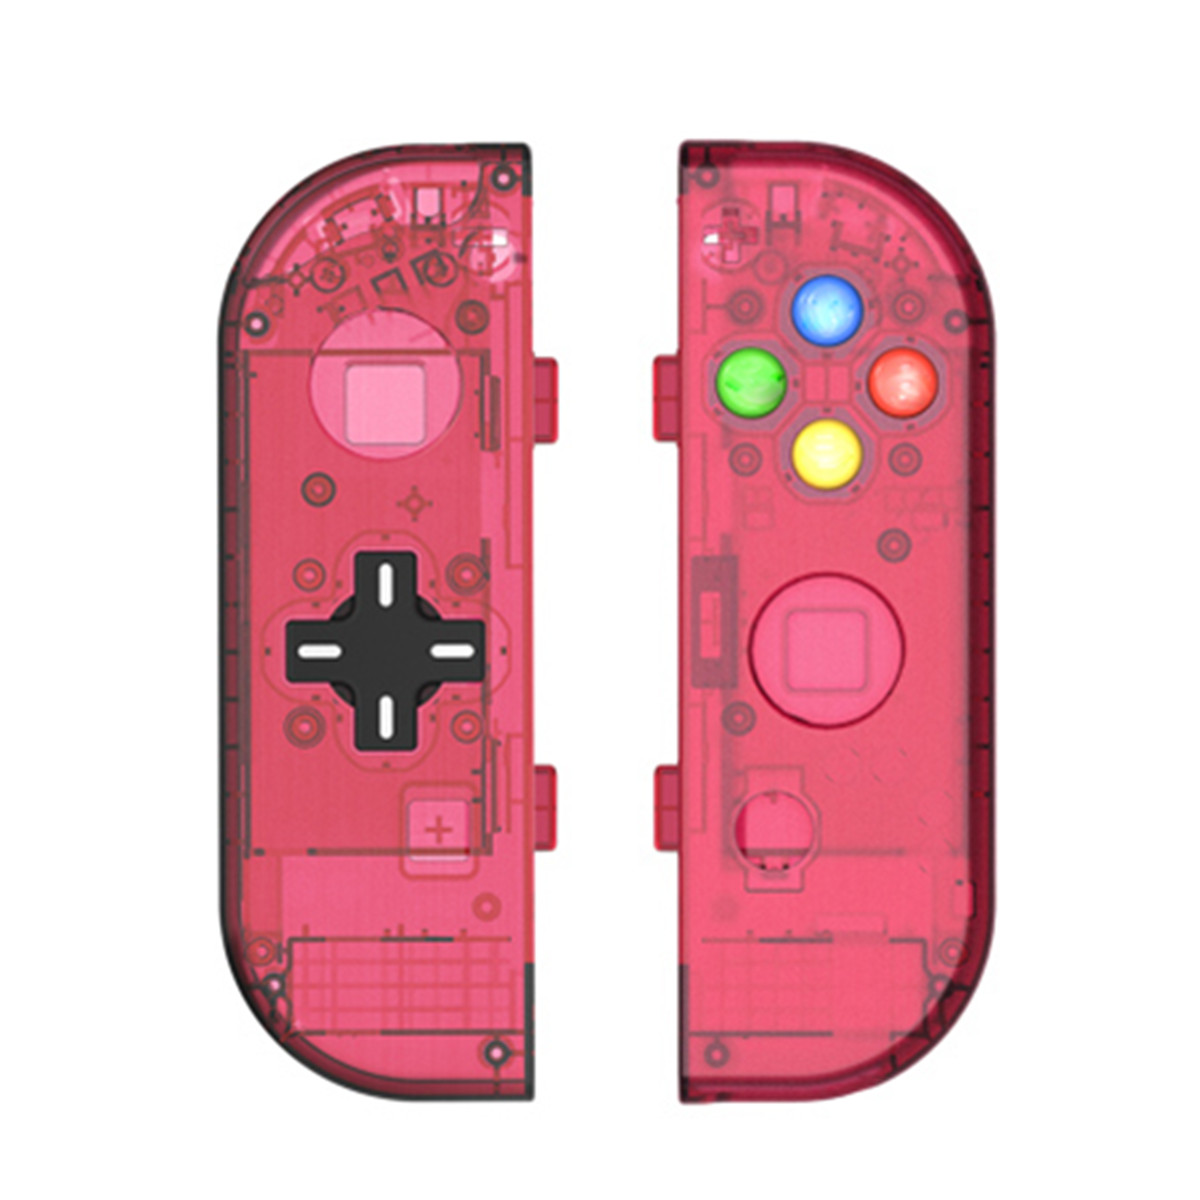 Handles Shell Case Protective Replacement Accessories For Nintendo Switch Joy-con Controller